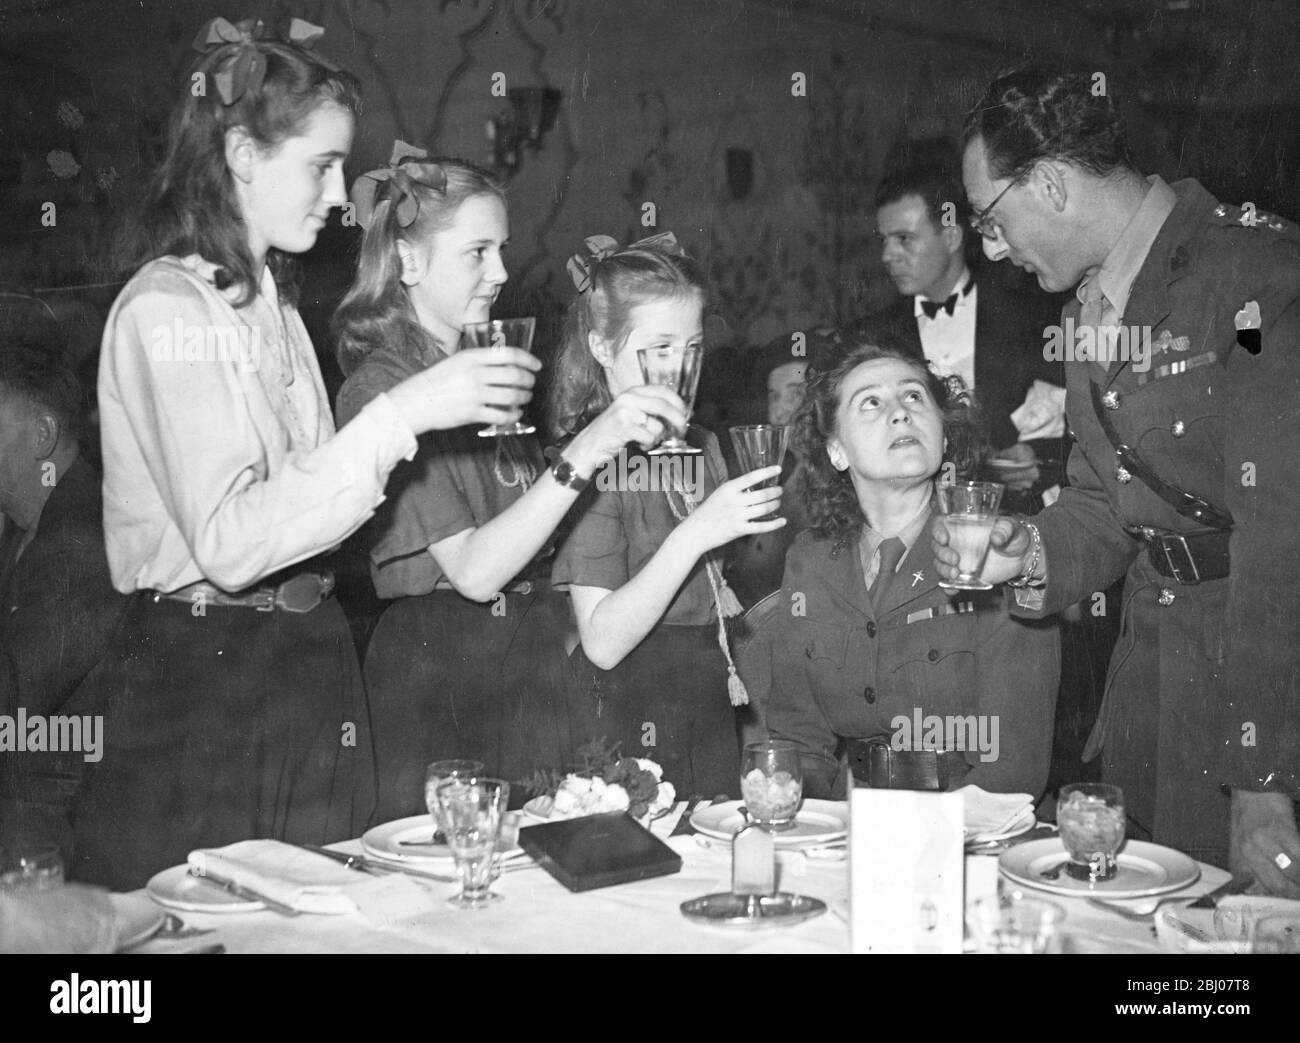 After receiving the George Cross from the King, Mrs Odette Sansom, MBE and her former commanding officer, Capt Peter Churchill, MC, who was decorated with the DSO at this morning's investiture, went to luncheon at the Hungaria Restaurant, London. - Picture shows: Capt. Churchill and Mrs Sansom's three daughters Franois, Lili and Marianne, toasting the lady of the day at the luncheon. - 19 November 1946 Stock Photo